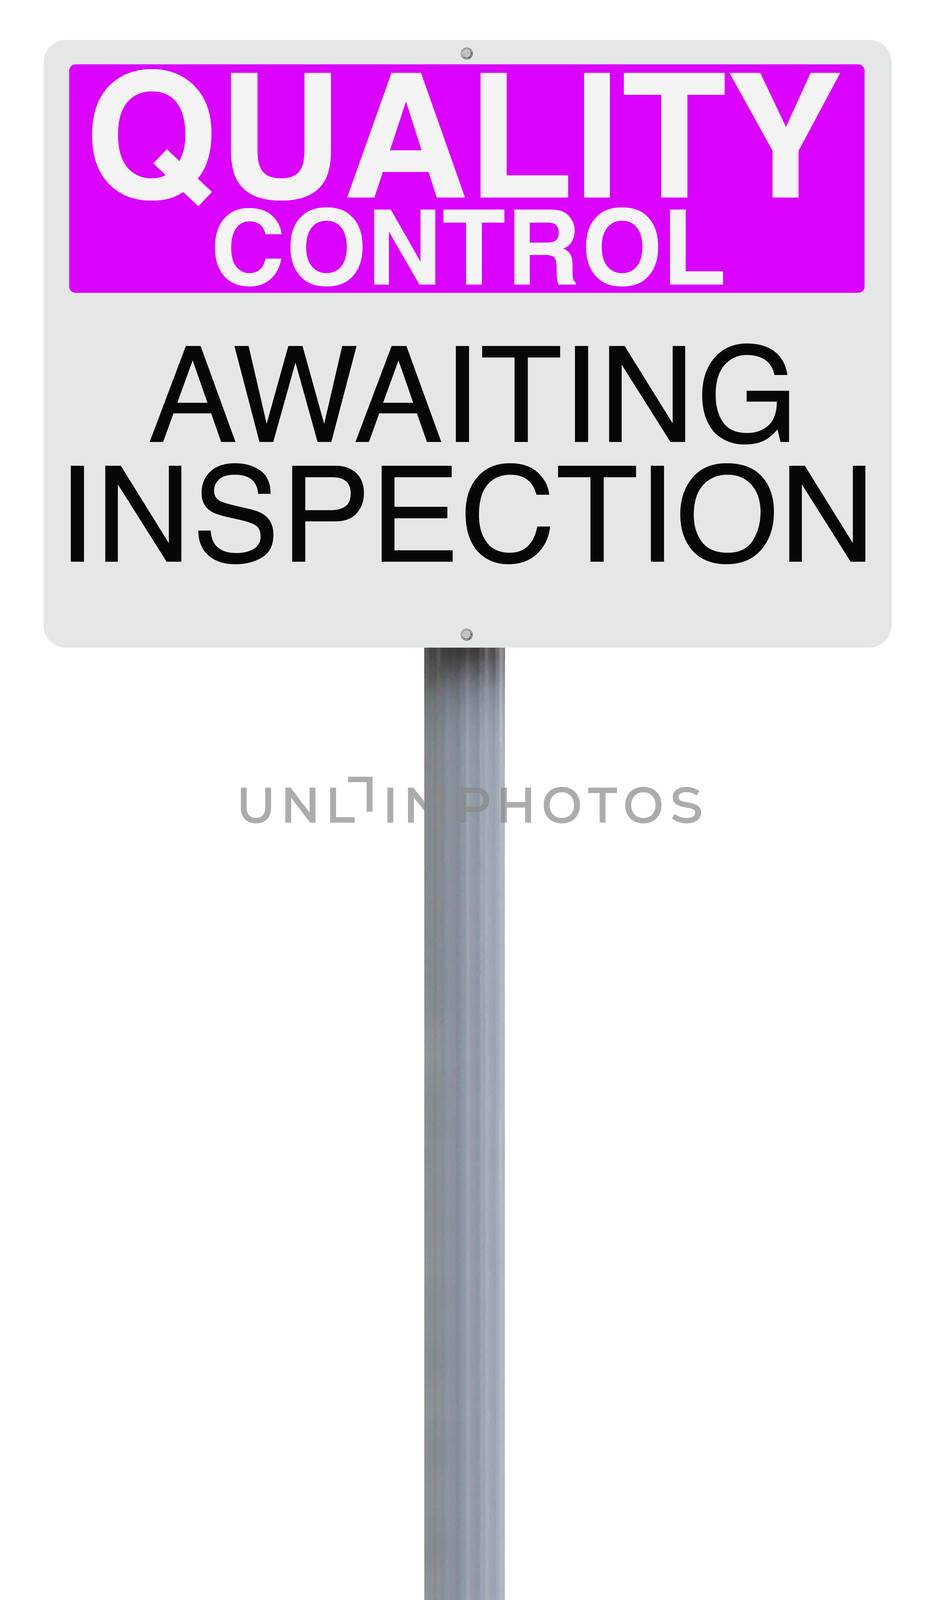 A quality control sign indicating Awaiting Inspection